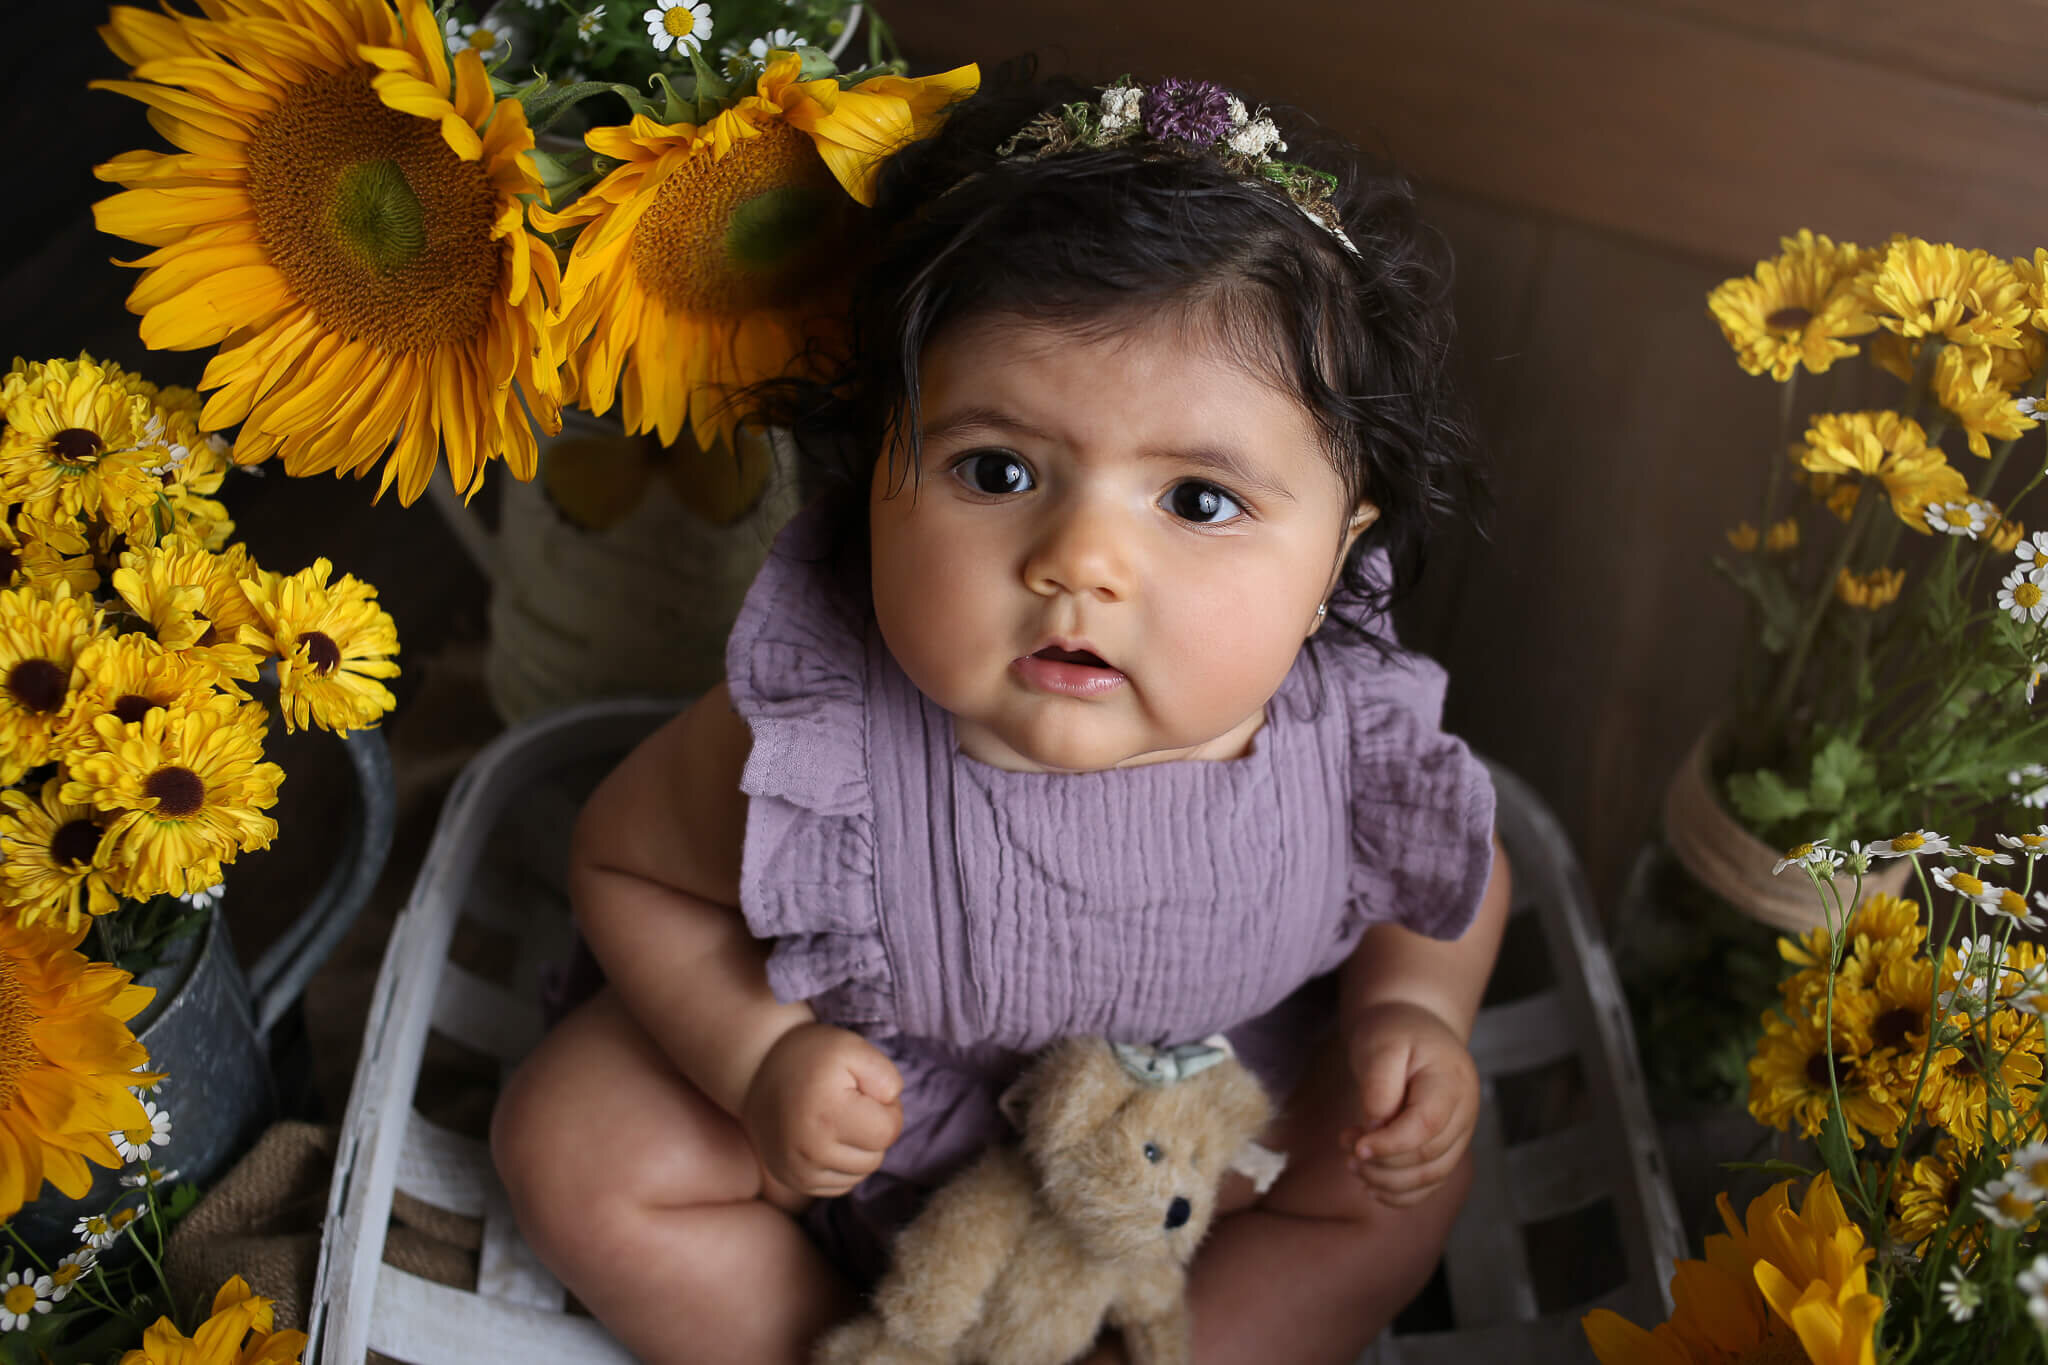  An image from above of a cute baby girl in her ruffled one-piece outfit, sitting in a basket with a teddy bear with a vase of sunflowers and daisies behind her, reaching a new milestone from a baby milestone photo session 